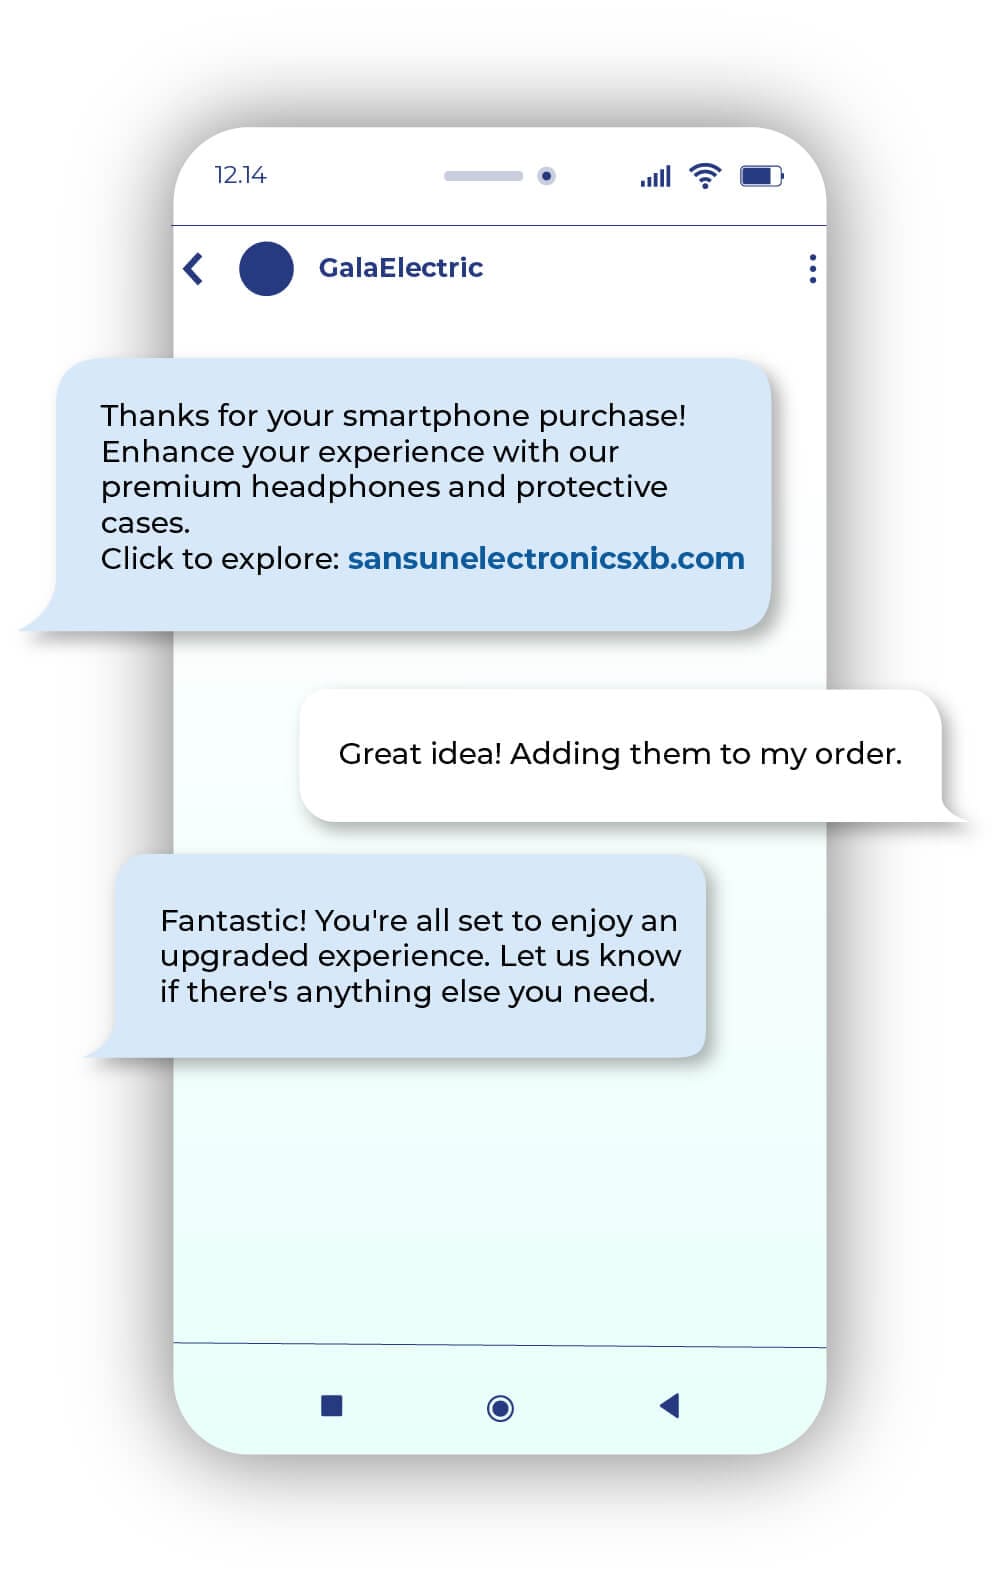 Personalised recommendations with Two-way messaging